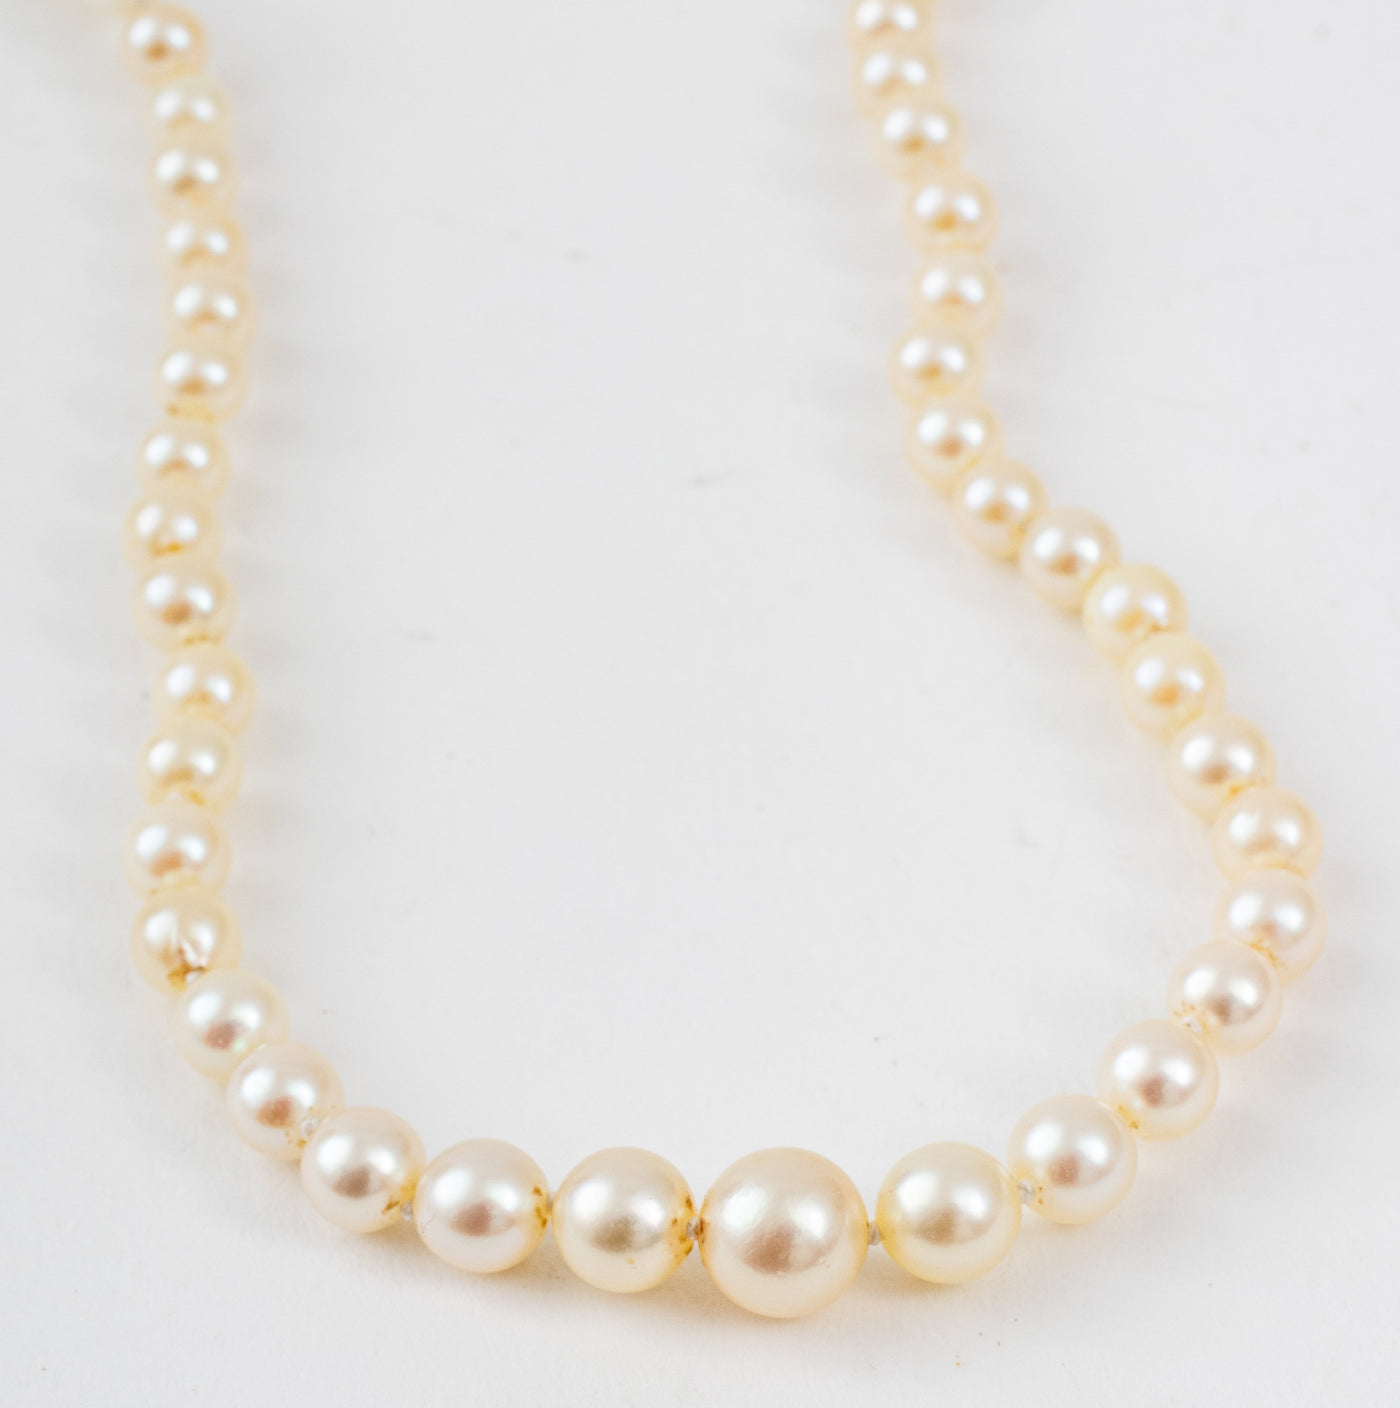 Wholesale 20x30mm White Gold Filled Necklace Shortener Clasp Wholesale  20x30mm White Gold Filled Necklace Shortener Clasp [NF0090] - $1.90 :  Pearls at Pearls, Wholesale Pearls and Pearl Jewelry Supplies!